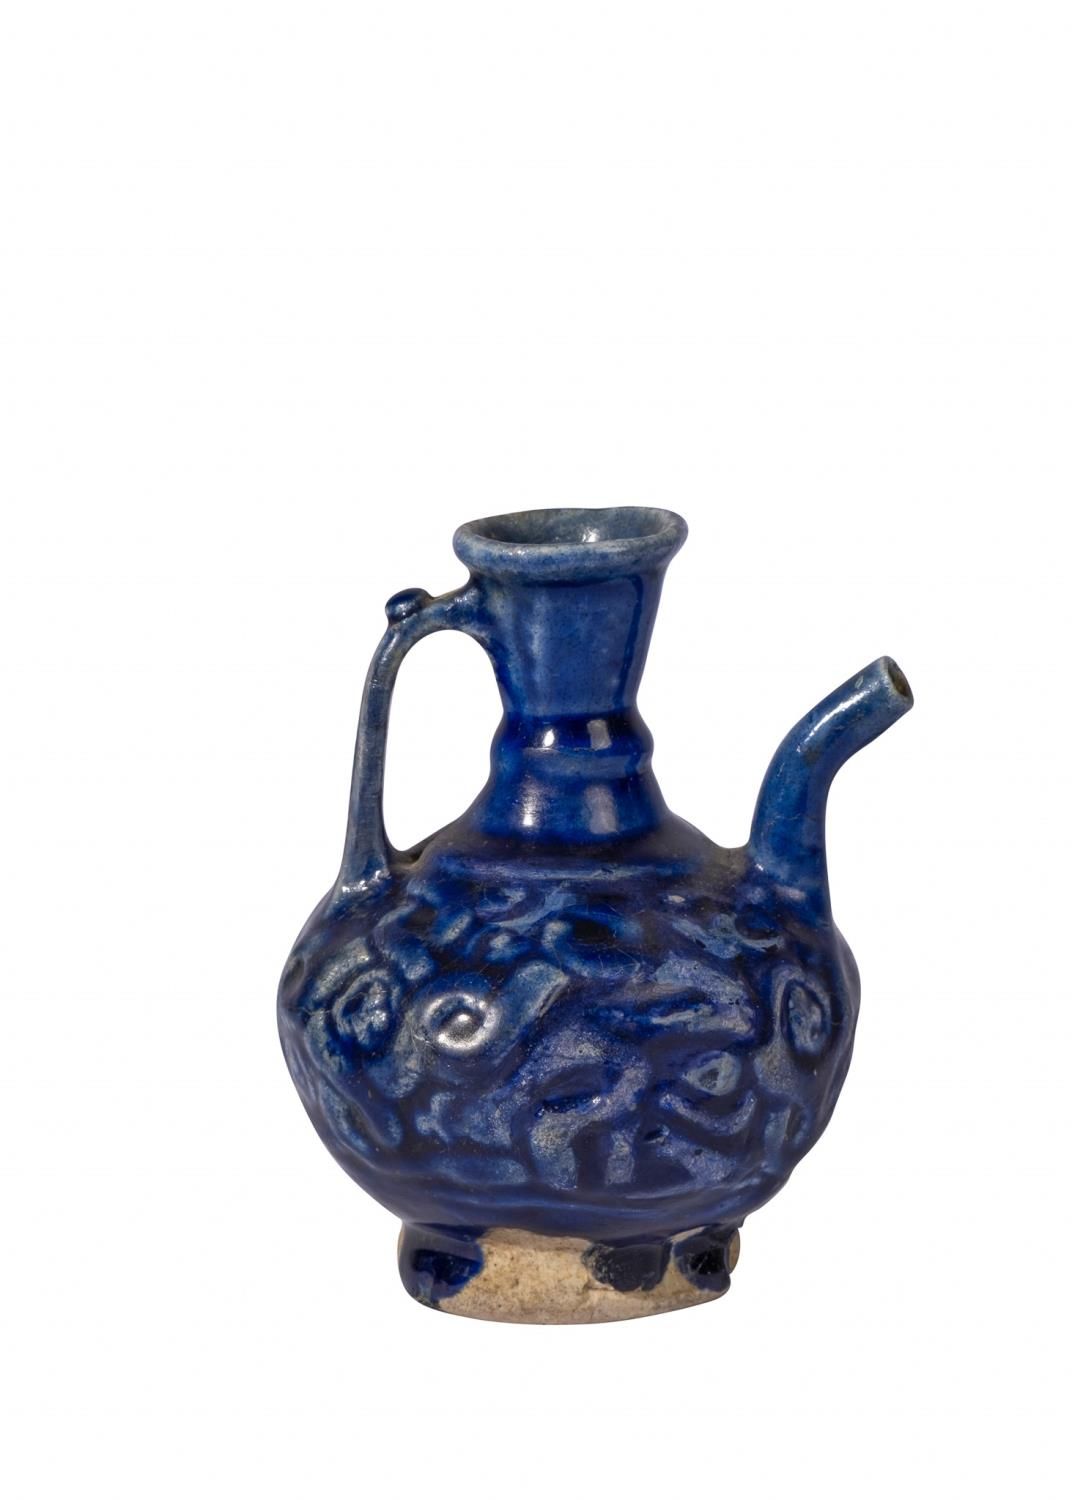 Null A COBALT BLUE MOULDED GLAZED KASHAN EWER WITH HANDLE, 12TH CENTURY PERSIA
 &hellip;